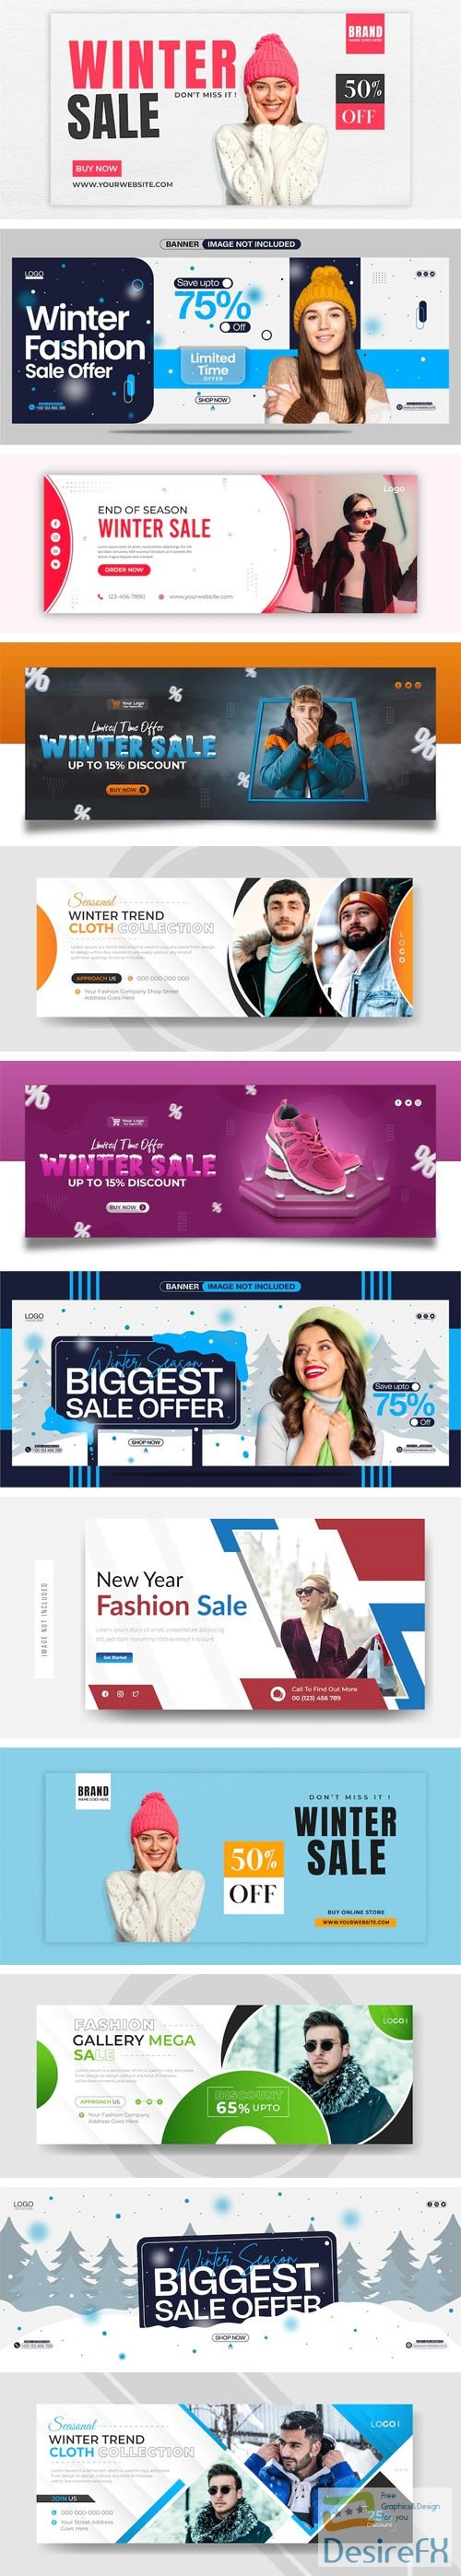 10+ Winter Sales Web Banners Vector Templates